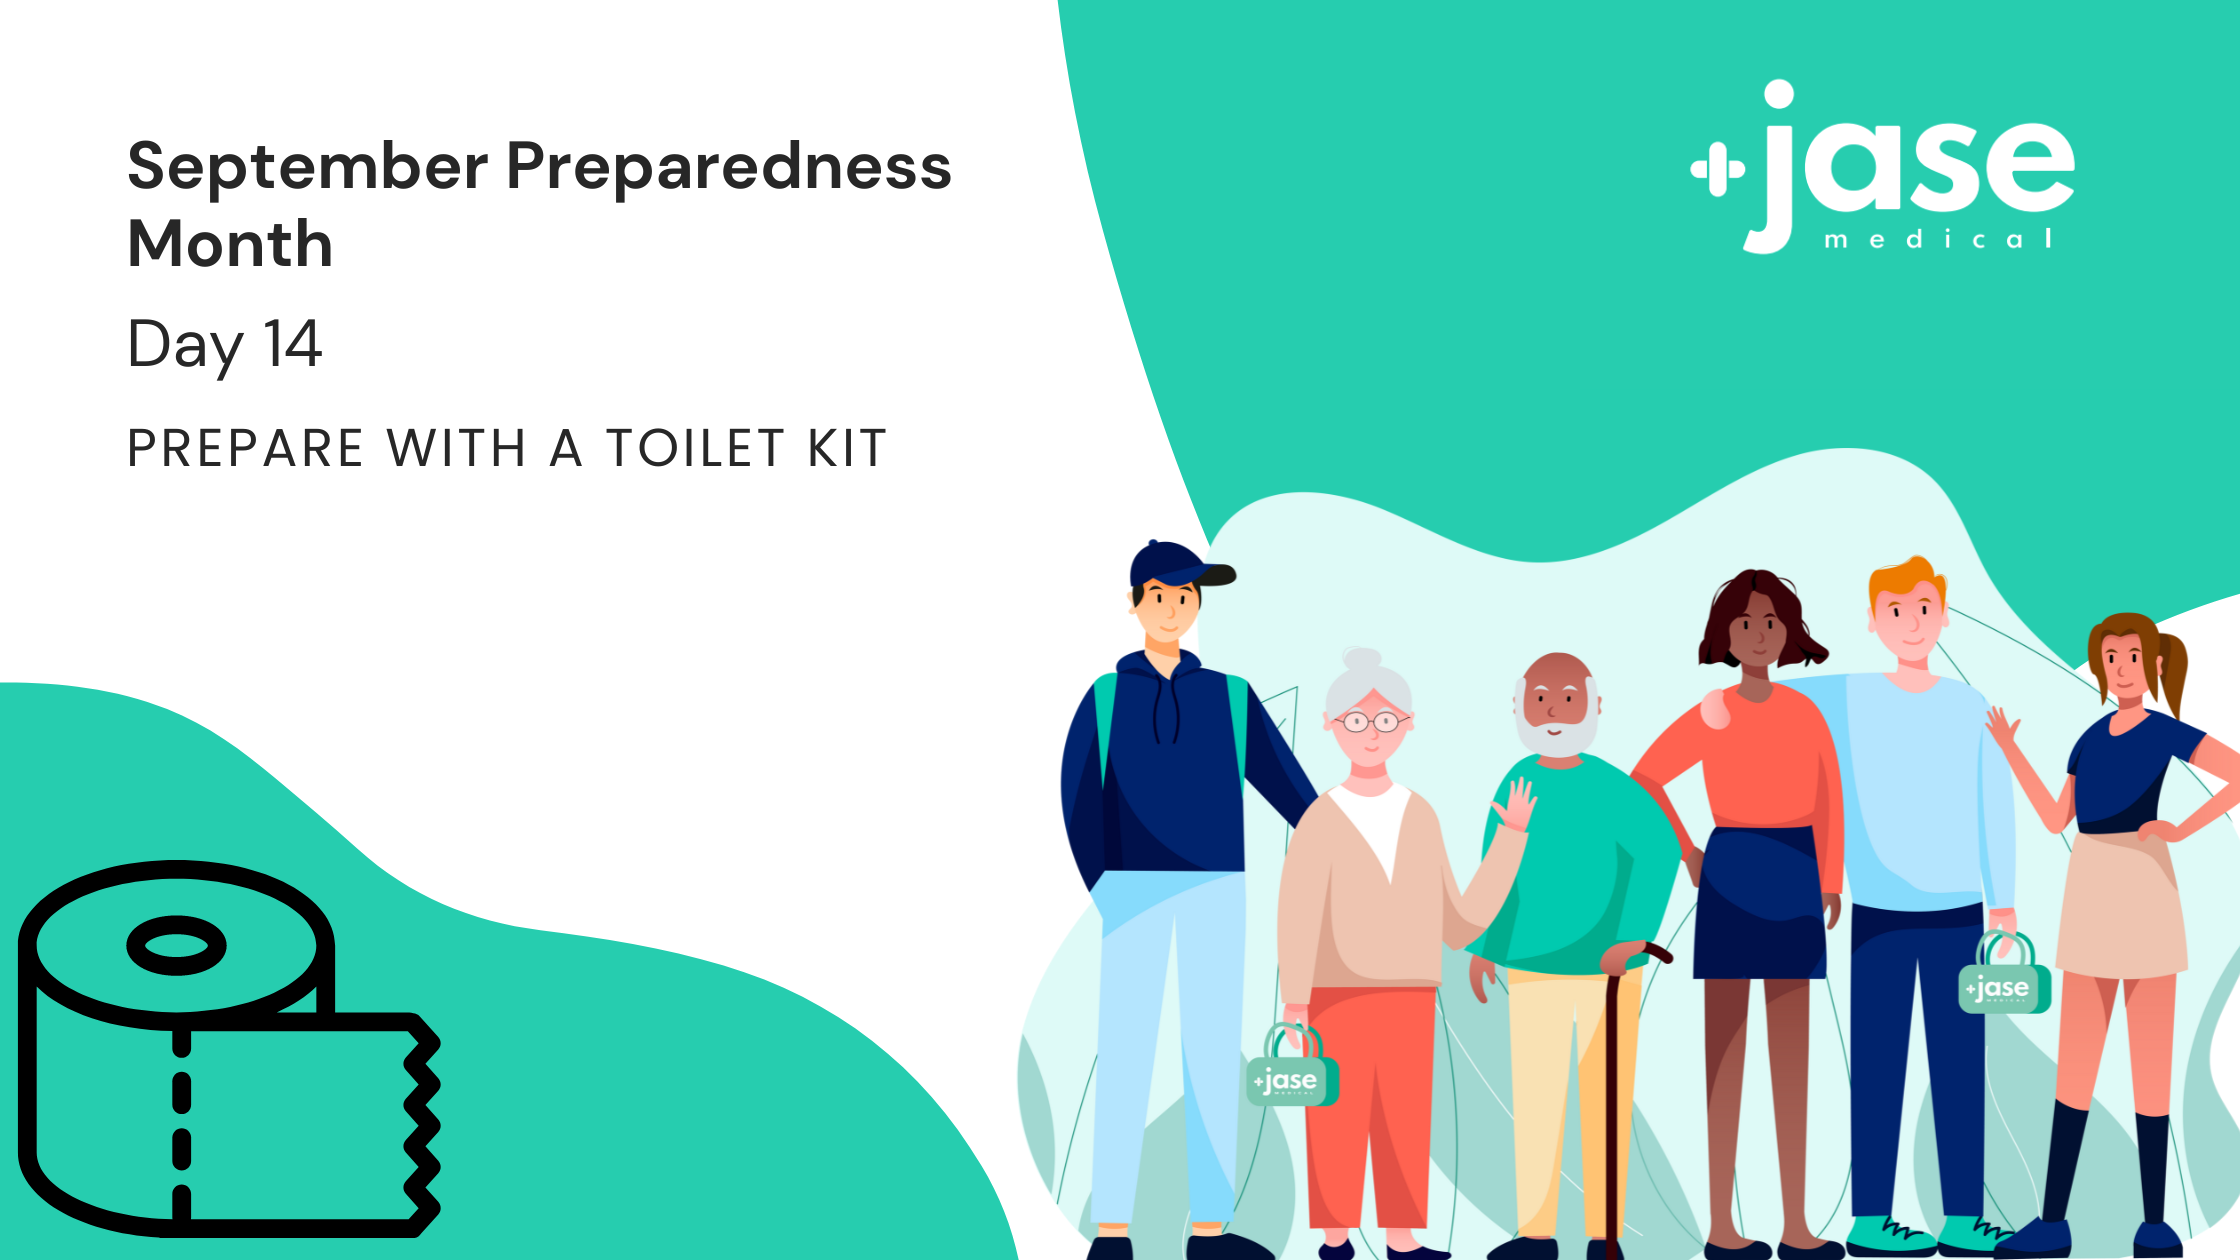 Prepare with a Toilet Kit